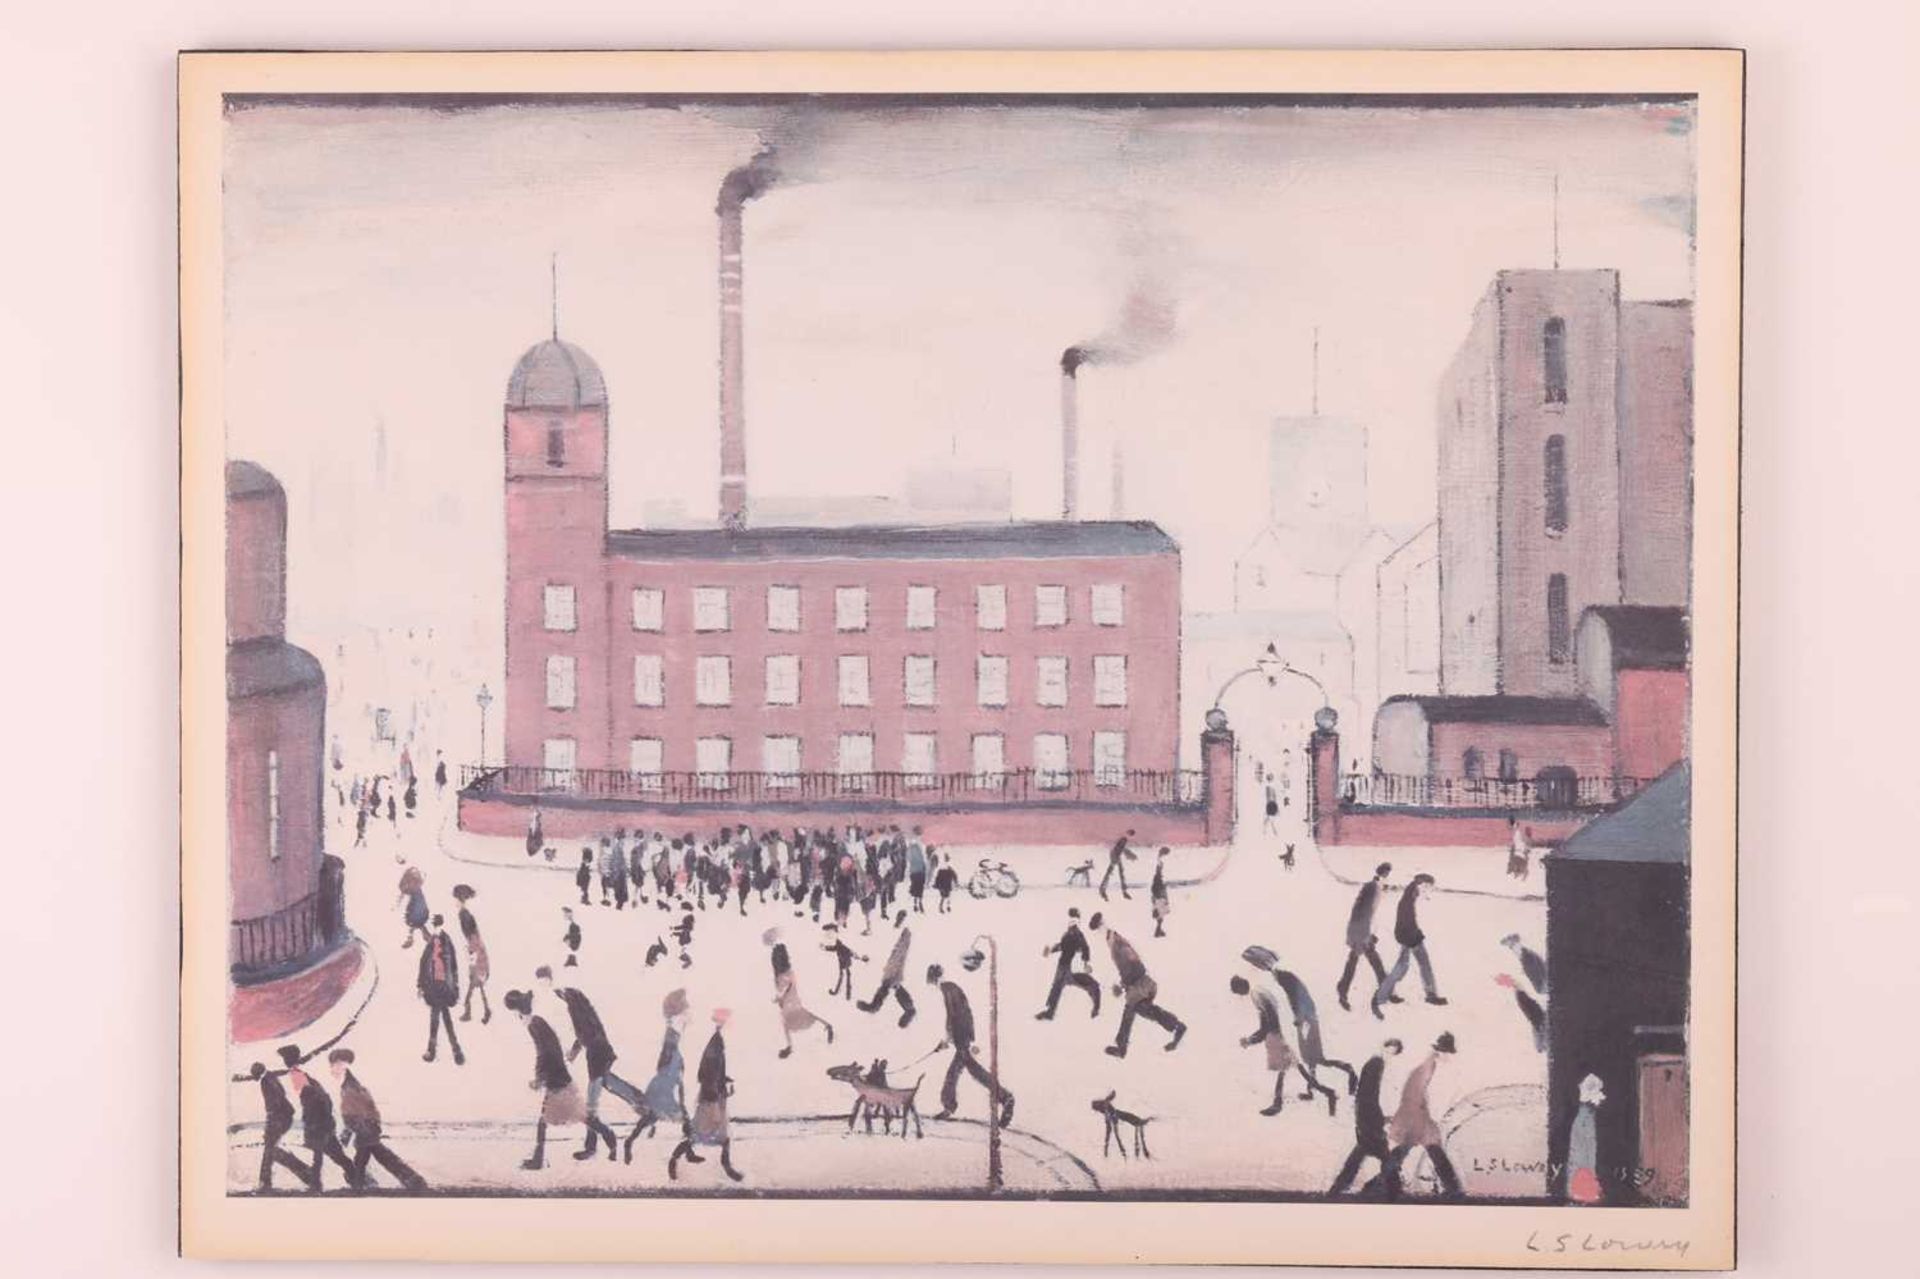 Laurence Stephen Lowry (1887-1976), 'Mill Scene', offset lithograph on paper, from an edition of 750 - Image 4 of 7